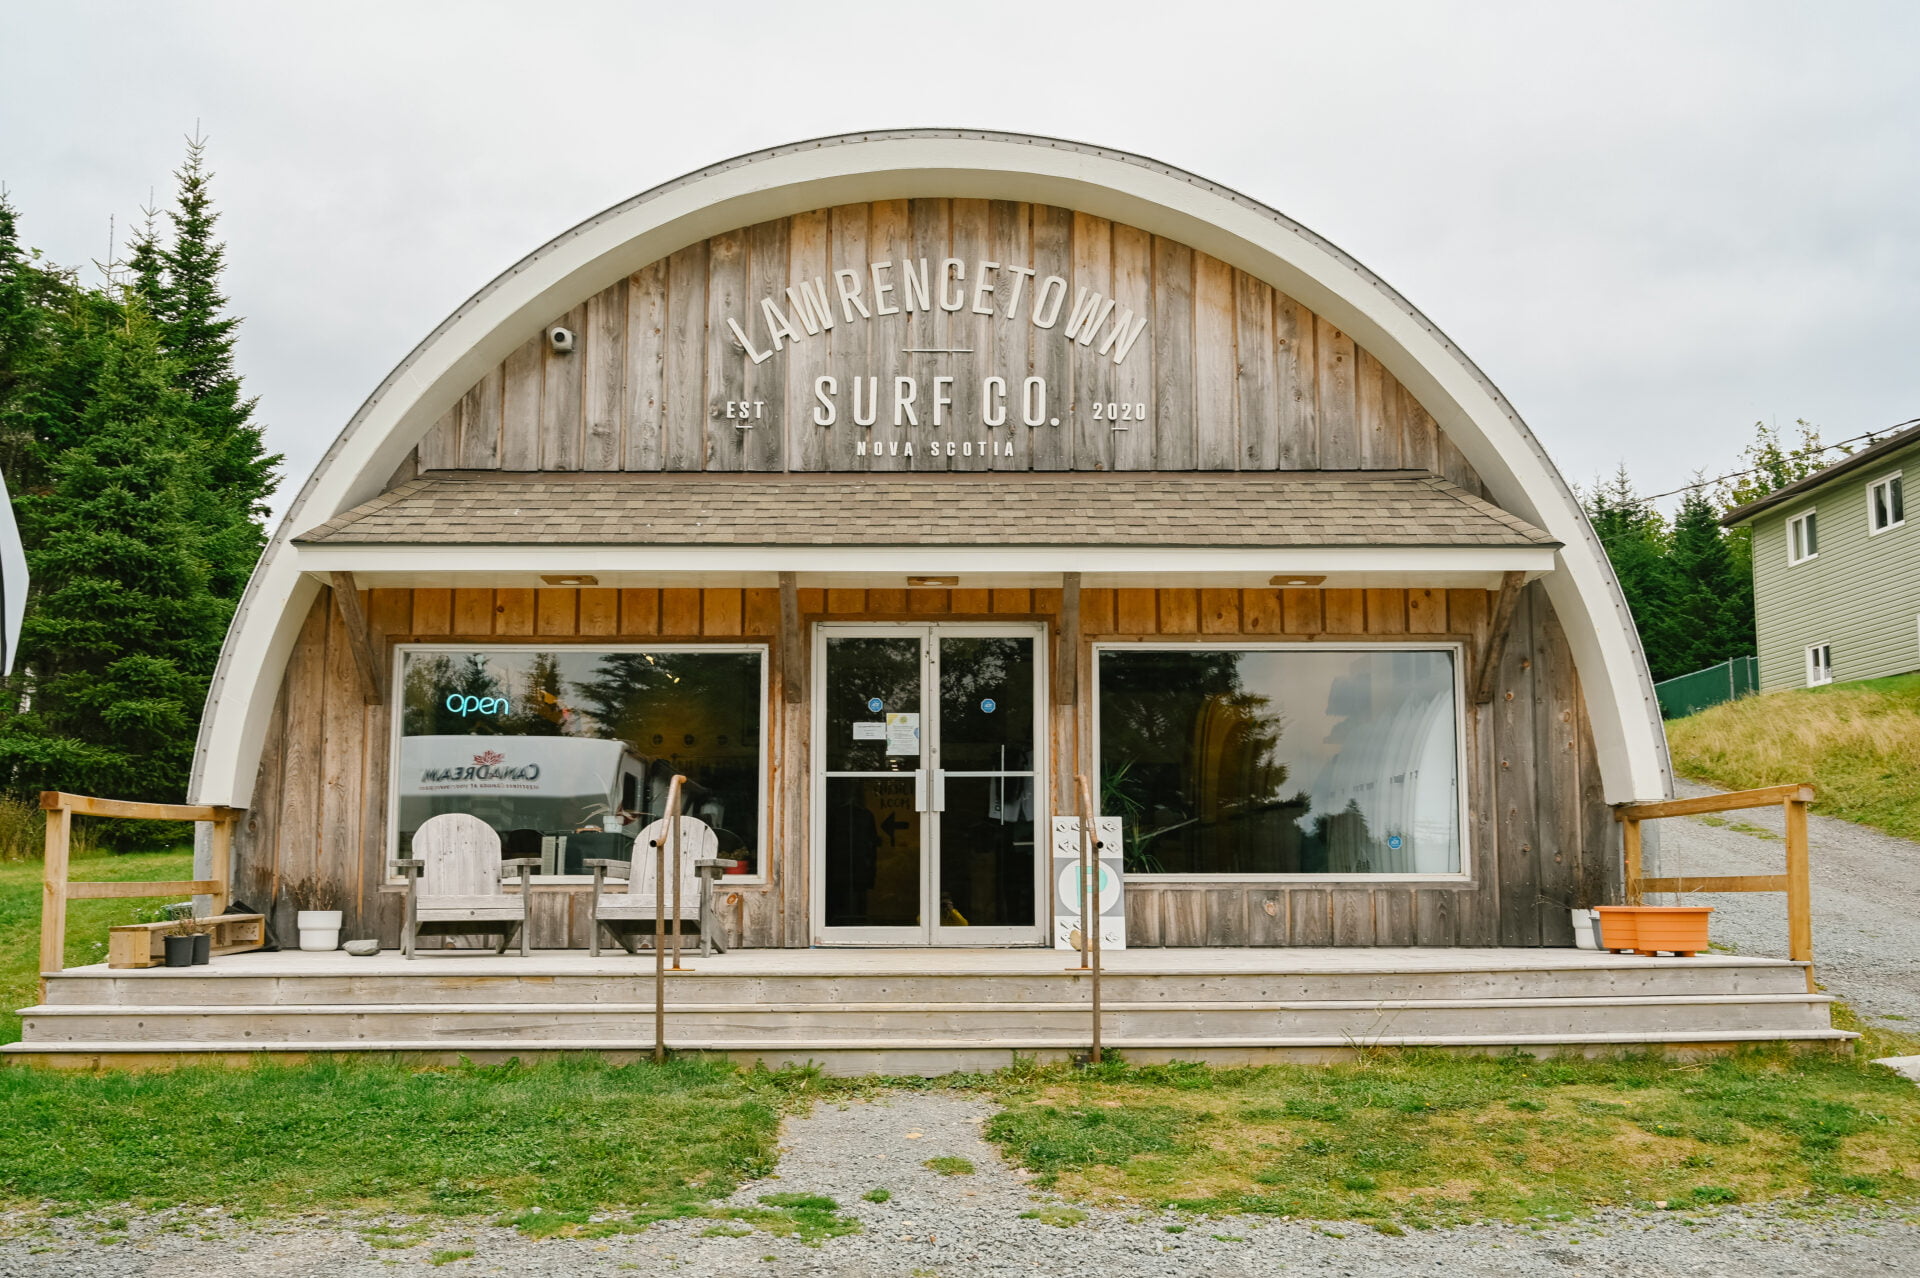 Lawrencetown Surf Co - The Best Surf Shop in Lawrencetown on eastern shore road trip
